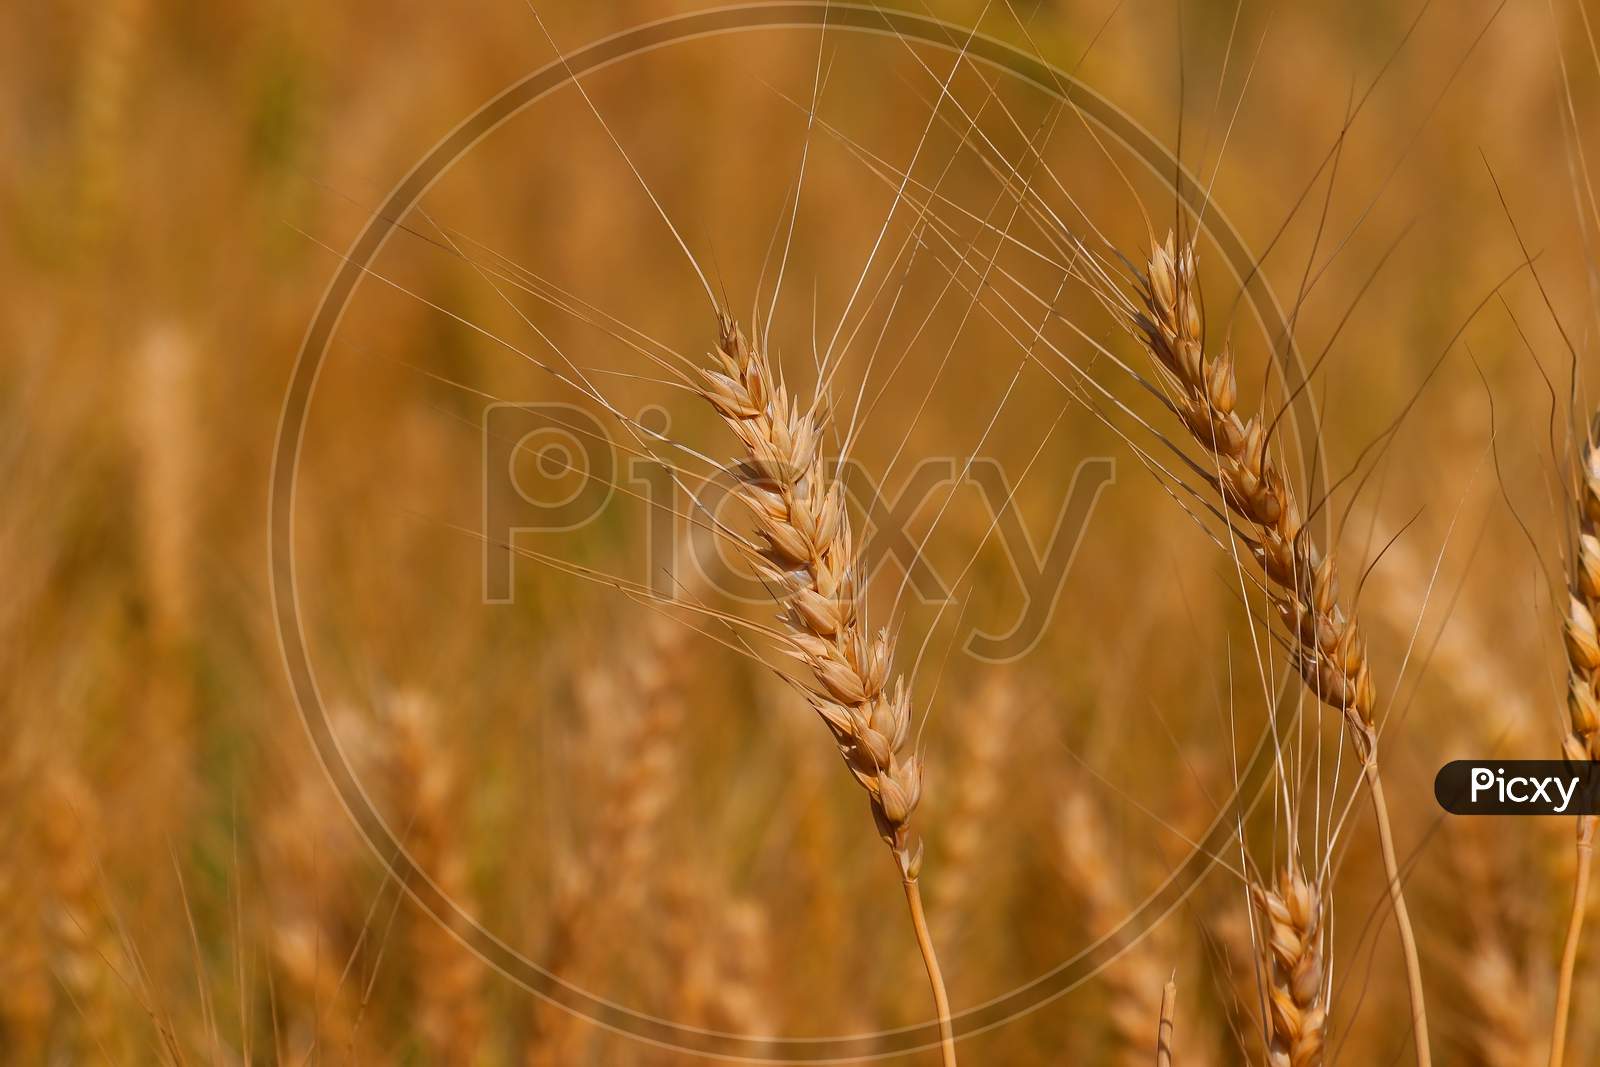 Close Up Of Ears Of Wheat Or Barley In Agriculture Field, Wheat Or Barley Crop